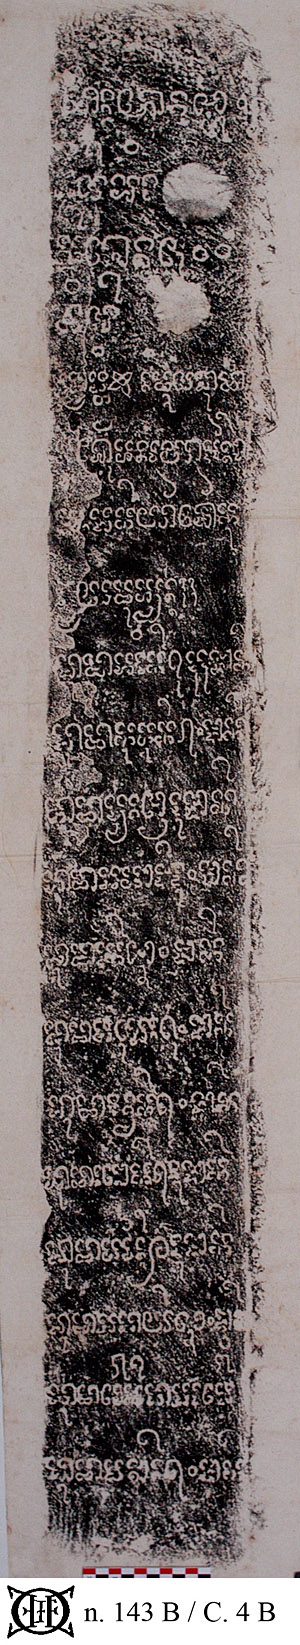 Photograph of an EFEO estampage under n. 143, showing the face b of the inscription C. 4.